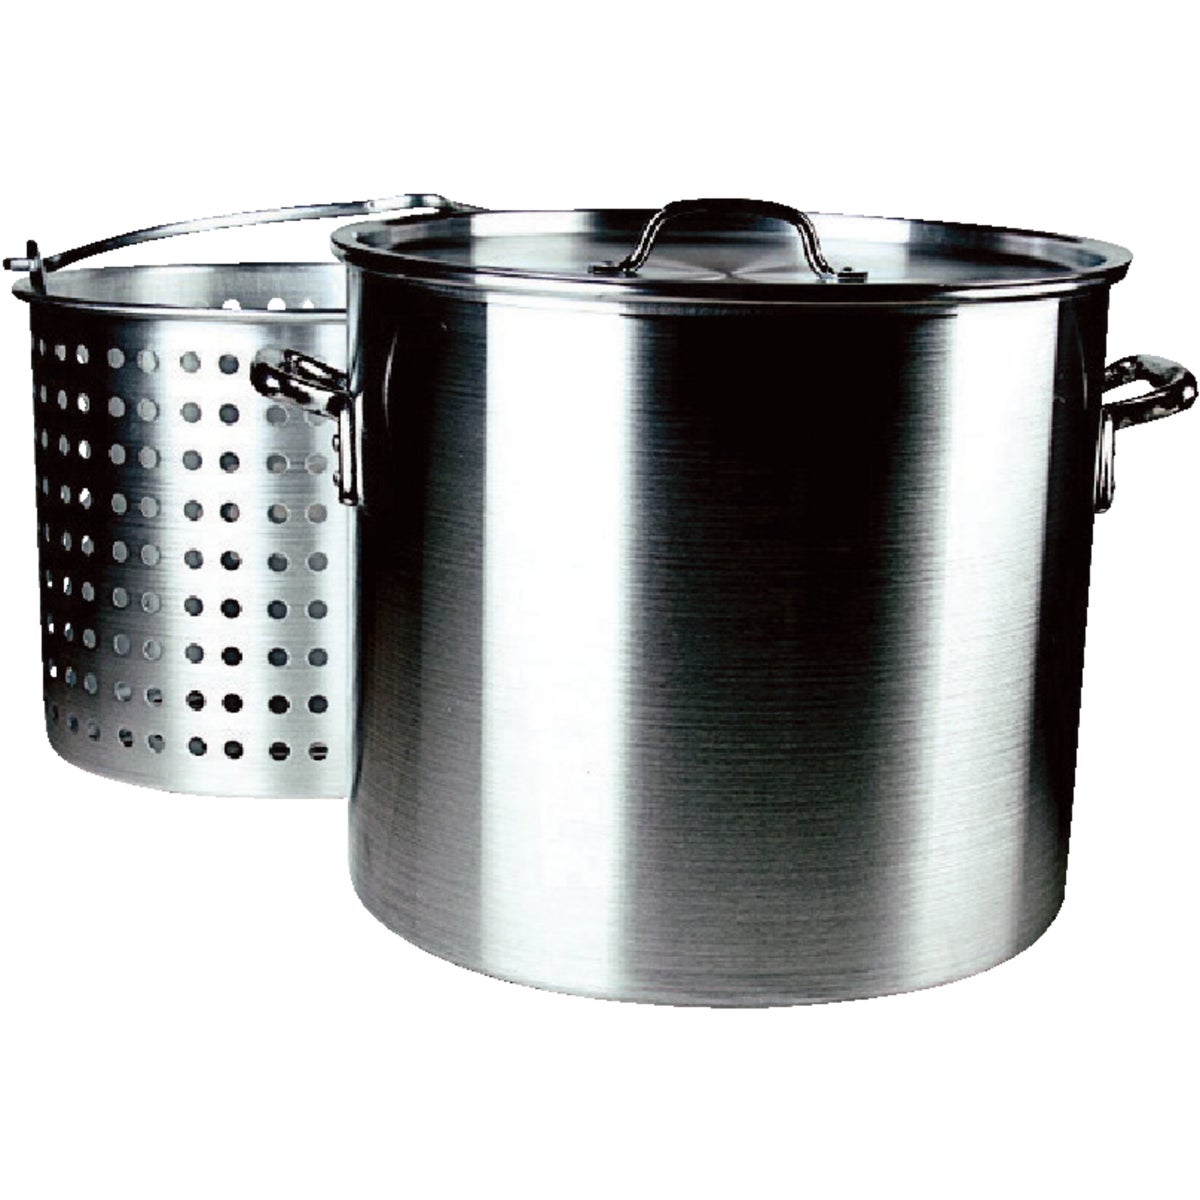 Item 800260, Aluminum boiling pot is commercial grade thickness and has heavy duty 